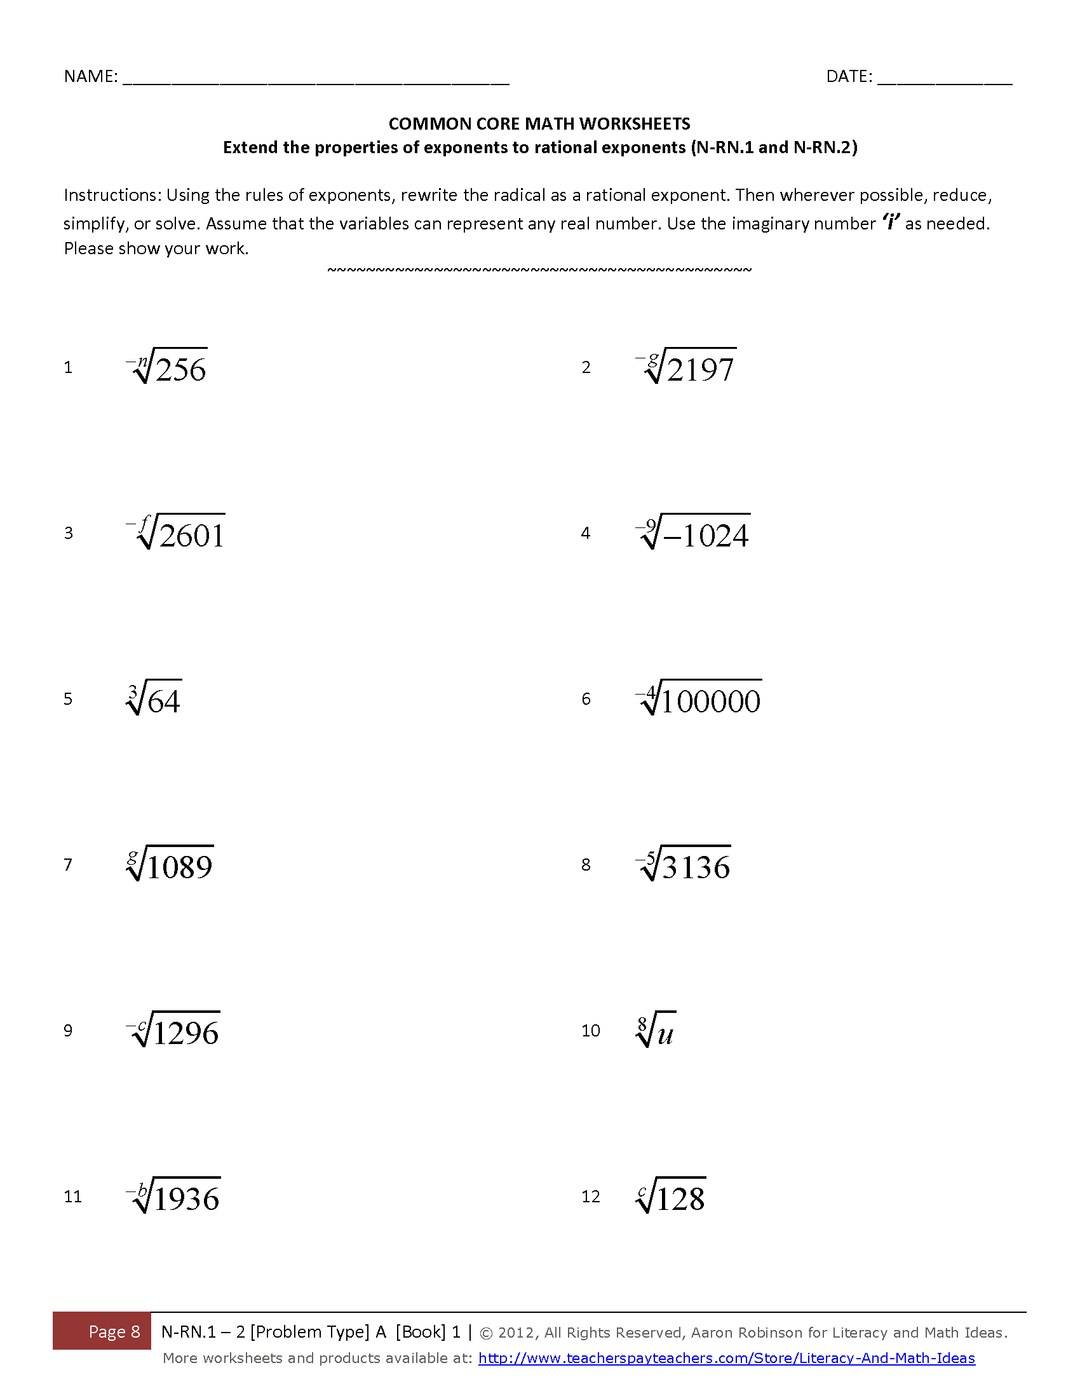 Worksheets for Common Core Math N-RN.1 and N-RN.2 Rational Exponents (Book A1)